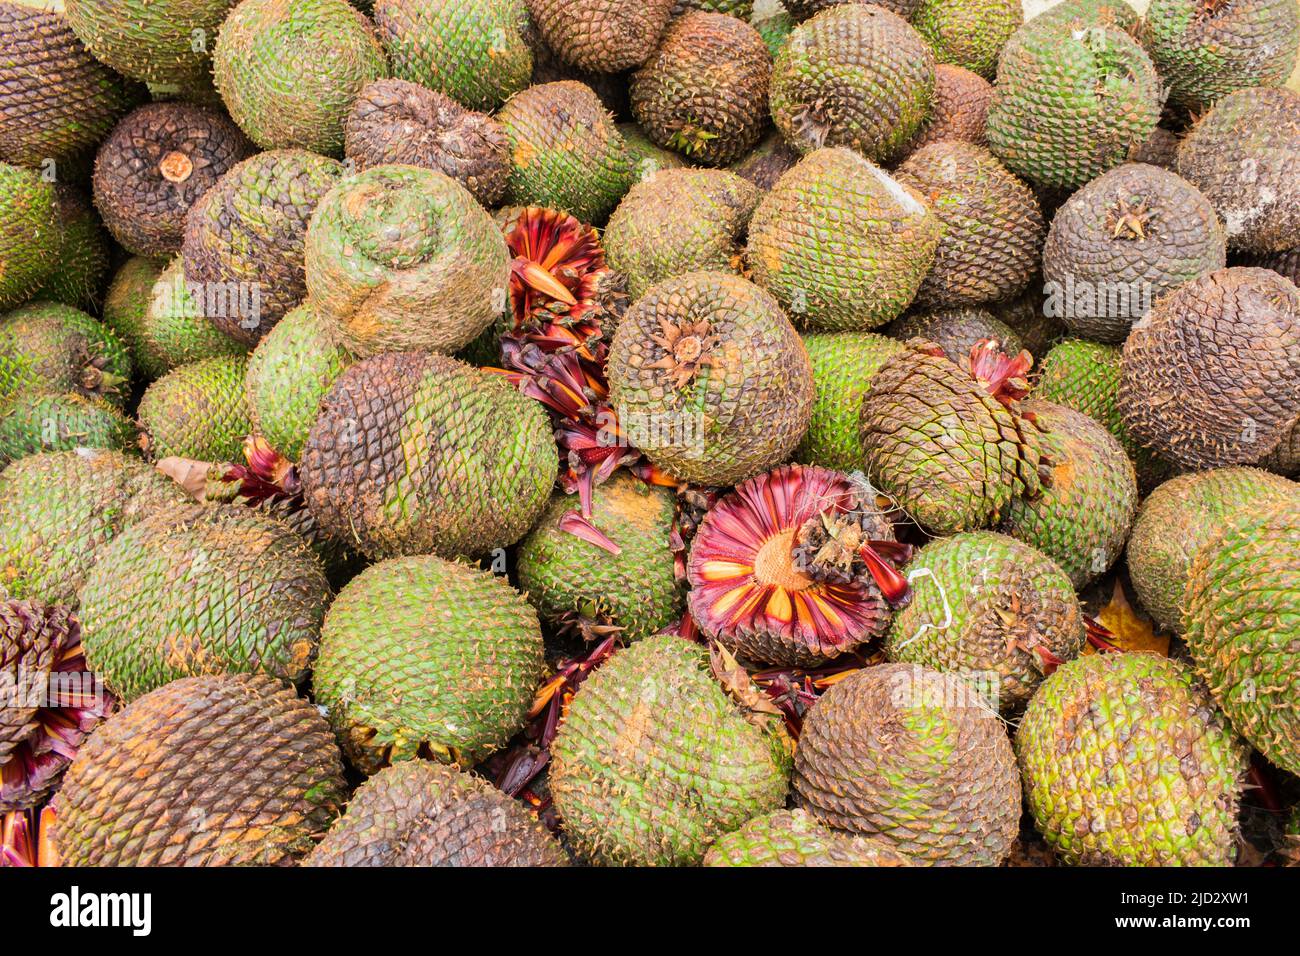 Araucaria pine cones and nuts (pinhao) in Sao Francisco de Paula - typical autumn/winter food in the South of Brazil Stock Photo